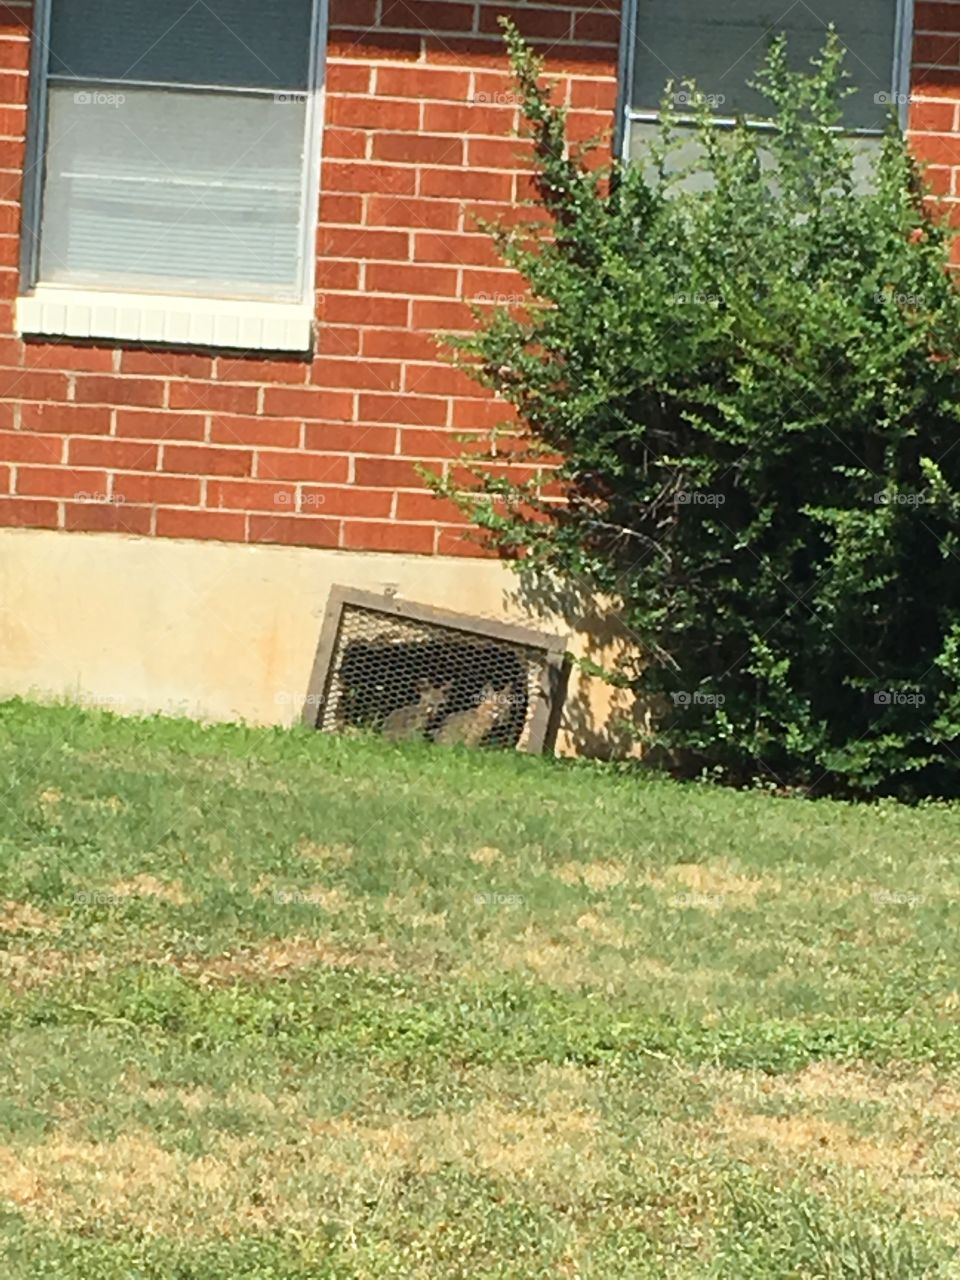 Two baby foxes under a building watching me through a grate. 